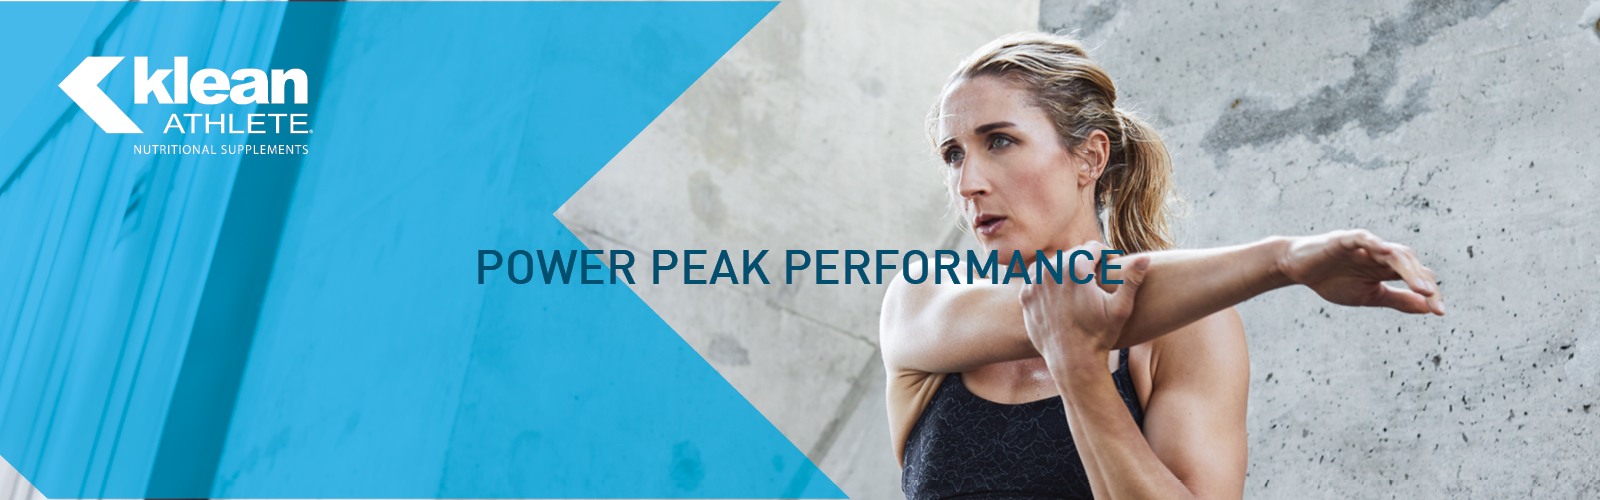 A women stretching with Klean Athlete logo and says “power peak performance”. 